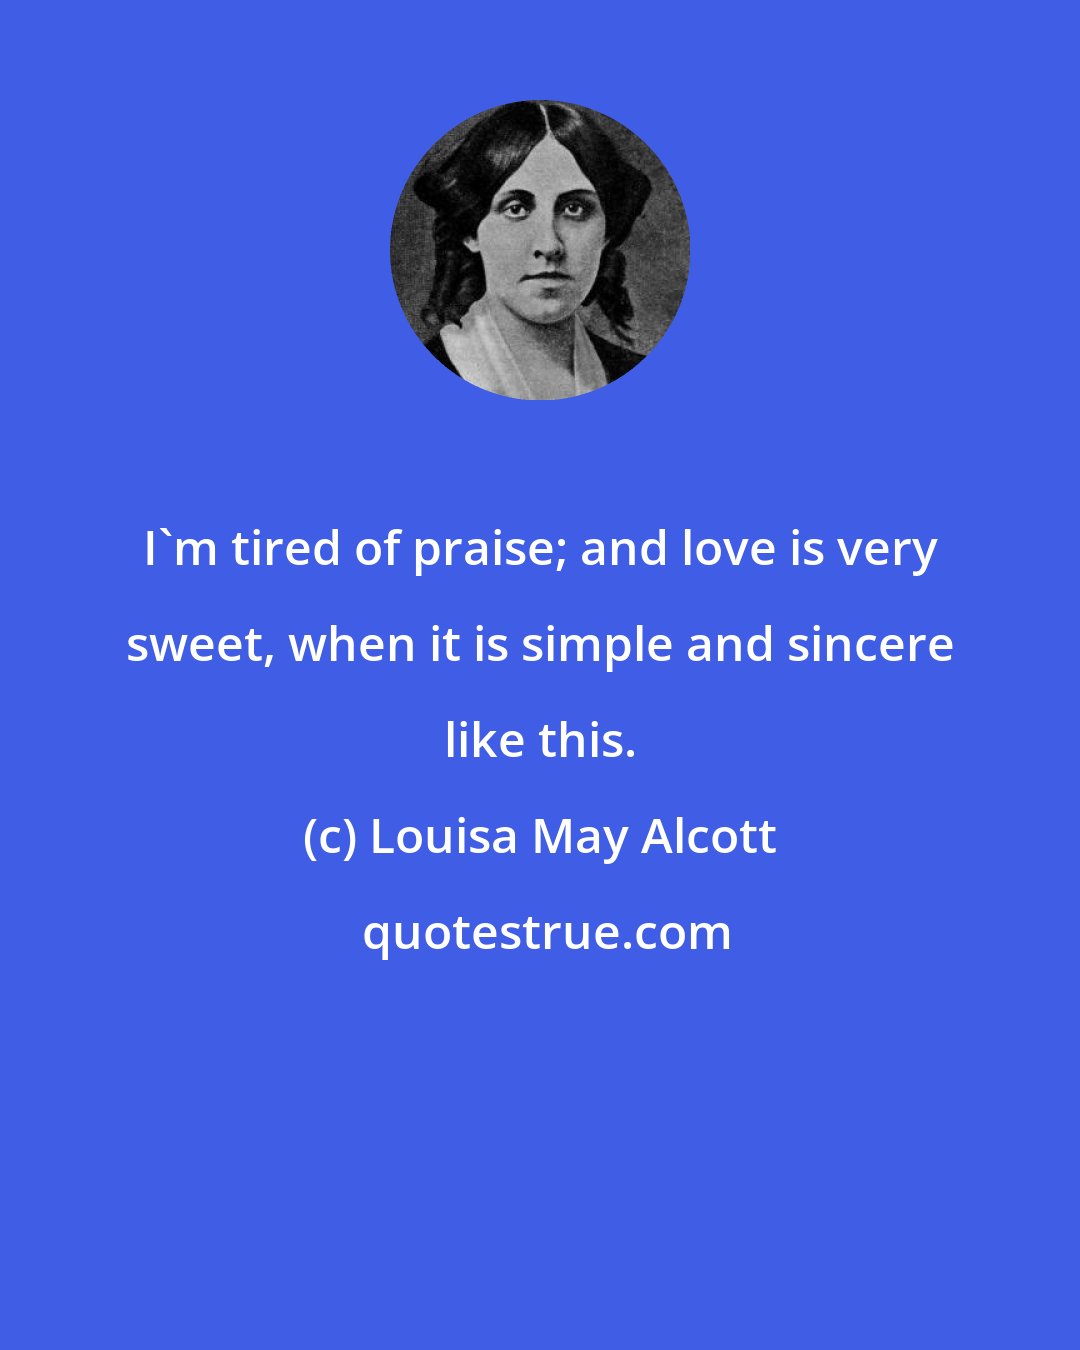 Louisa May Alcott: I'm tired of praise; and love is very sweet, when it is simple and sincere like this.